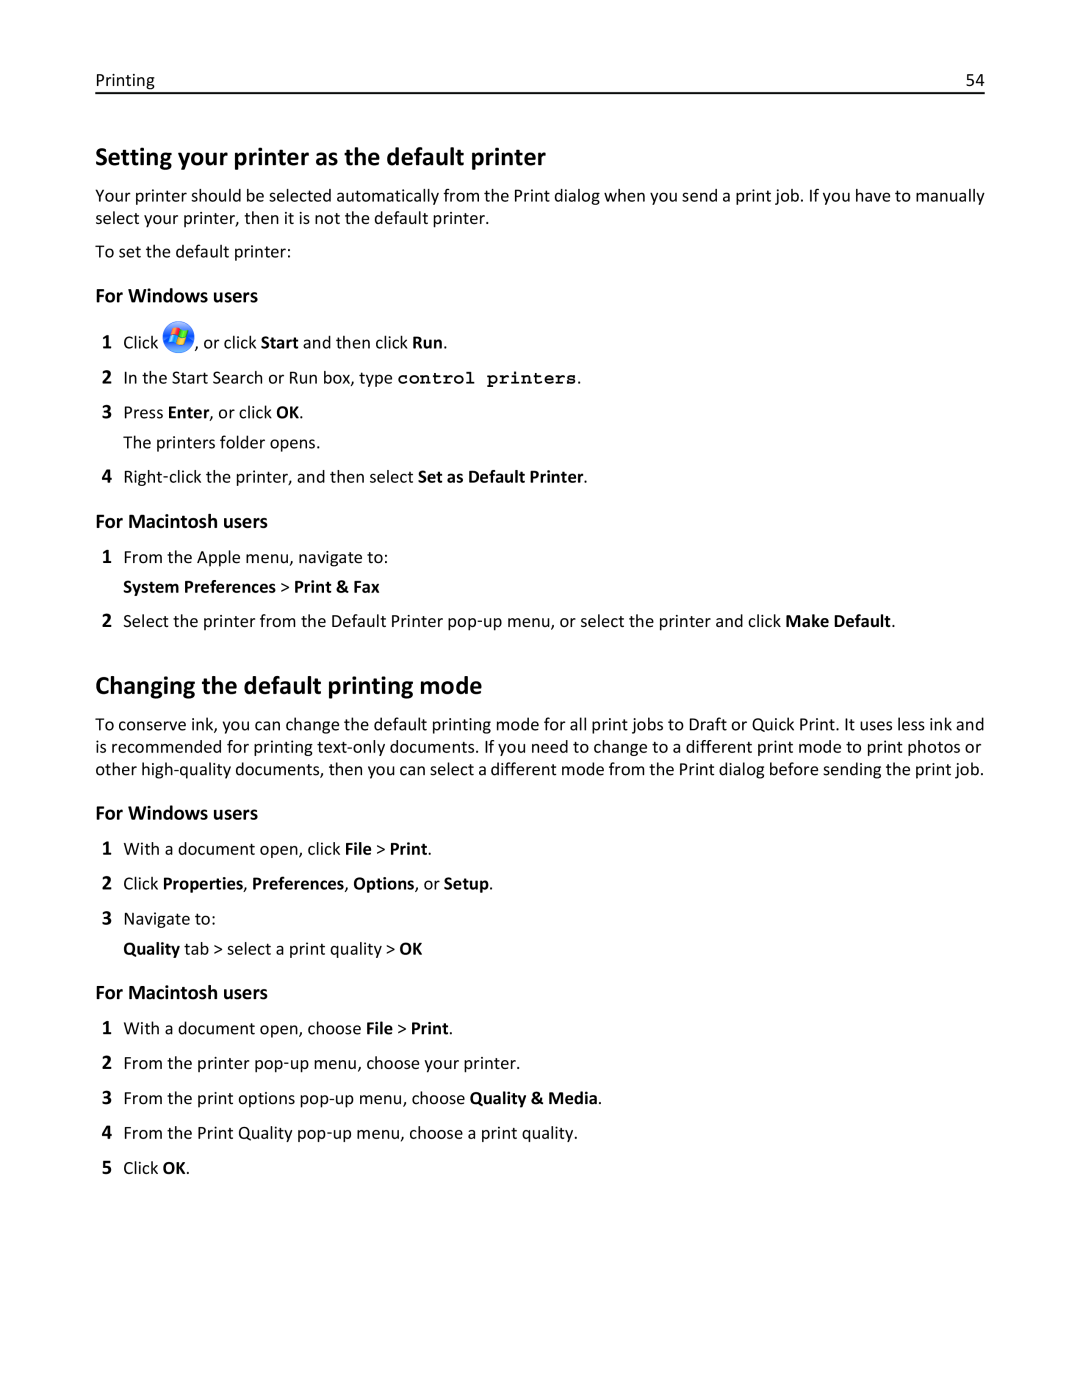 Lexmark PRO4000C manual Setting your printer as the default printer, Changing the default printing mode, For Windows users 